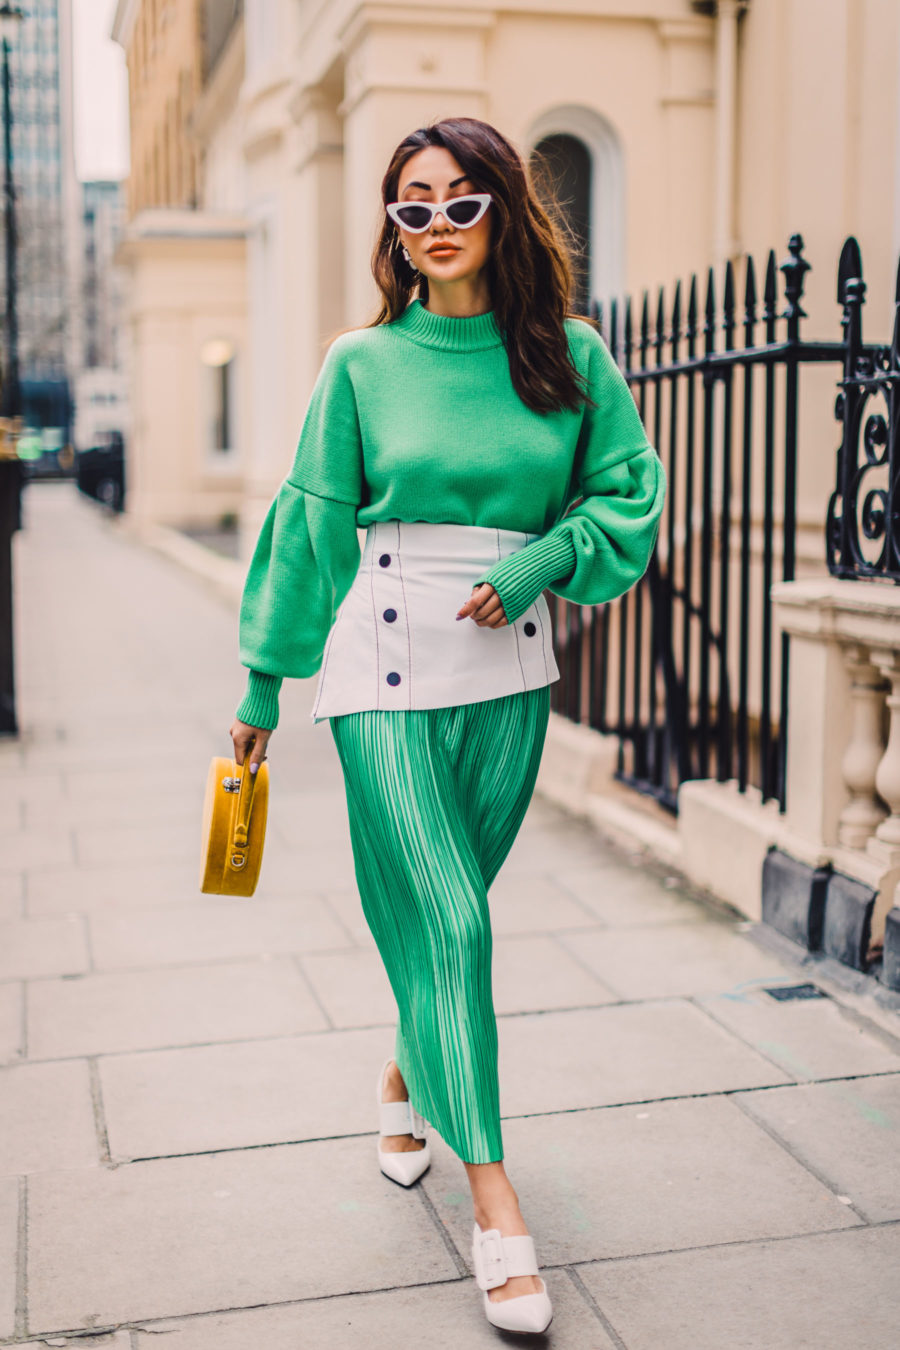 Shopbop Sale Alert - The Best Spring and Summer Items To Buy, Yellow Mini Handbag, Green Dress for Spring, White Pointed Pumps, Streetstyle, Green Pleated Dress, Jessica Wang // NotJessFashion.com